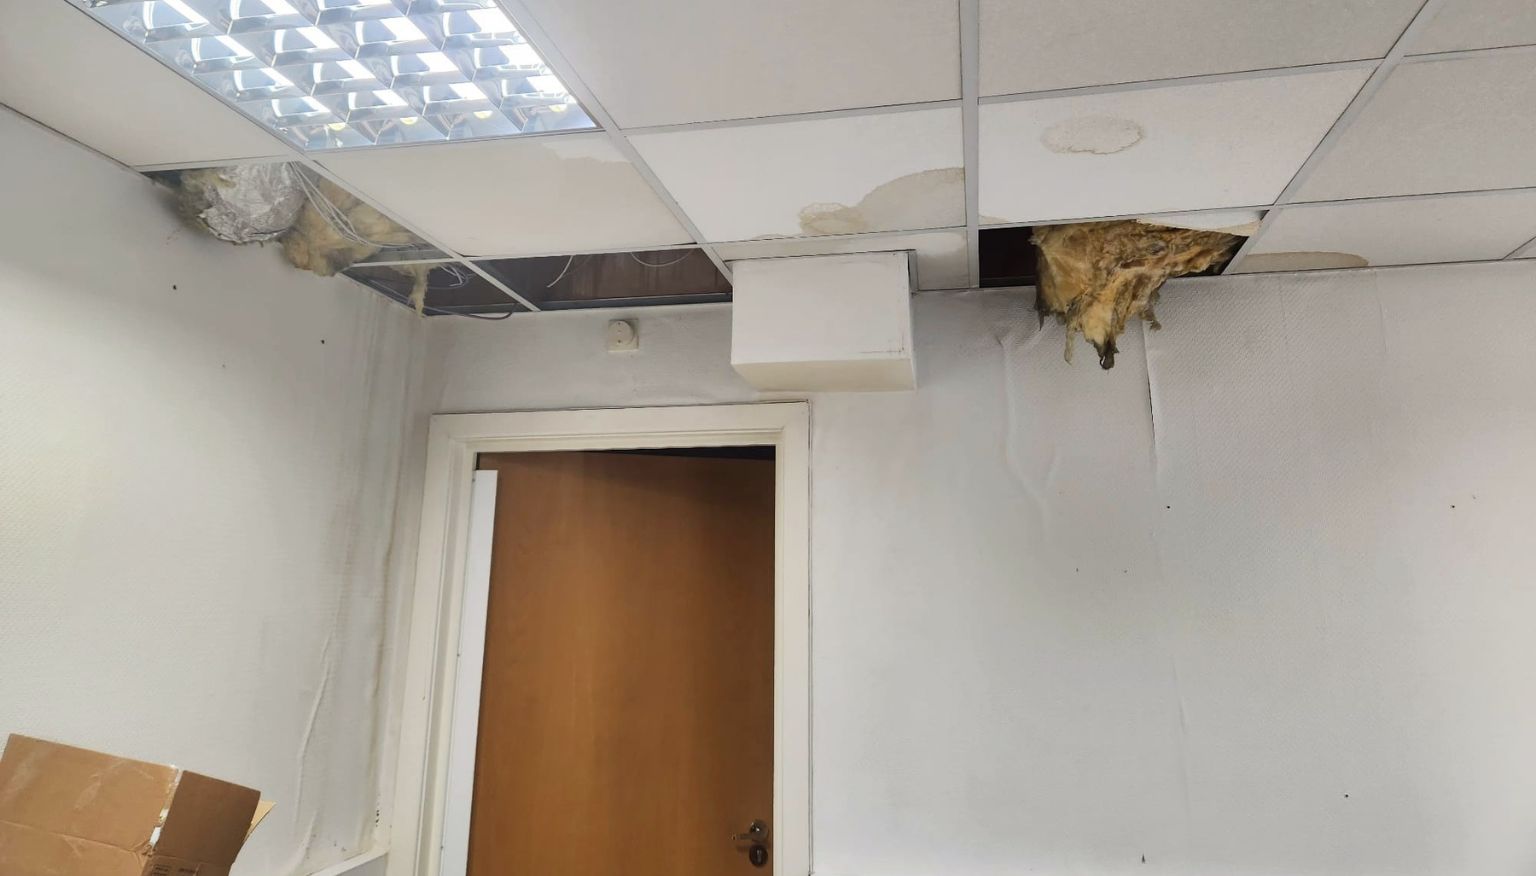 Rain damage to The Brain Charity offices caused by a collapsed ceiling from leaking roof